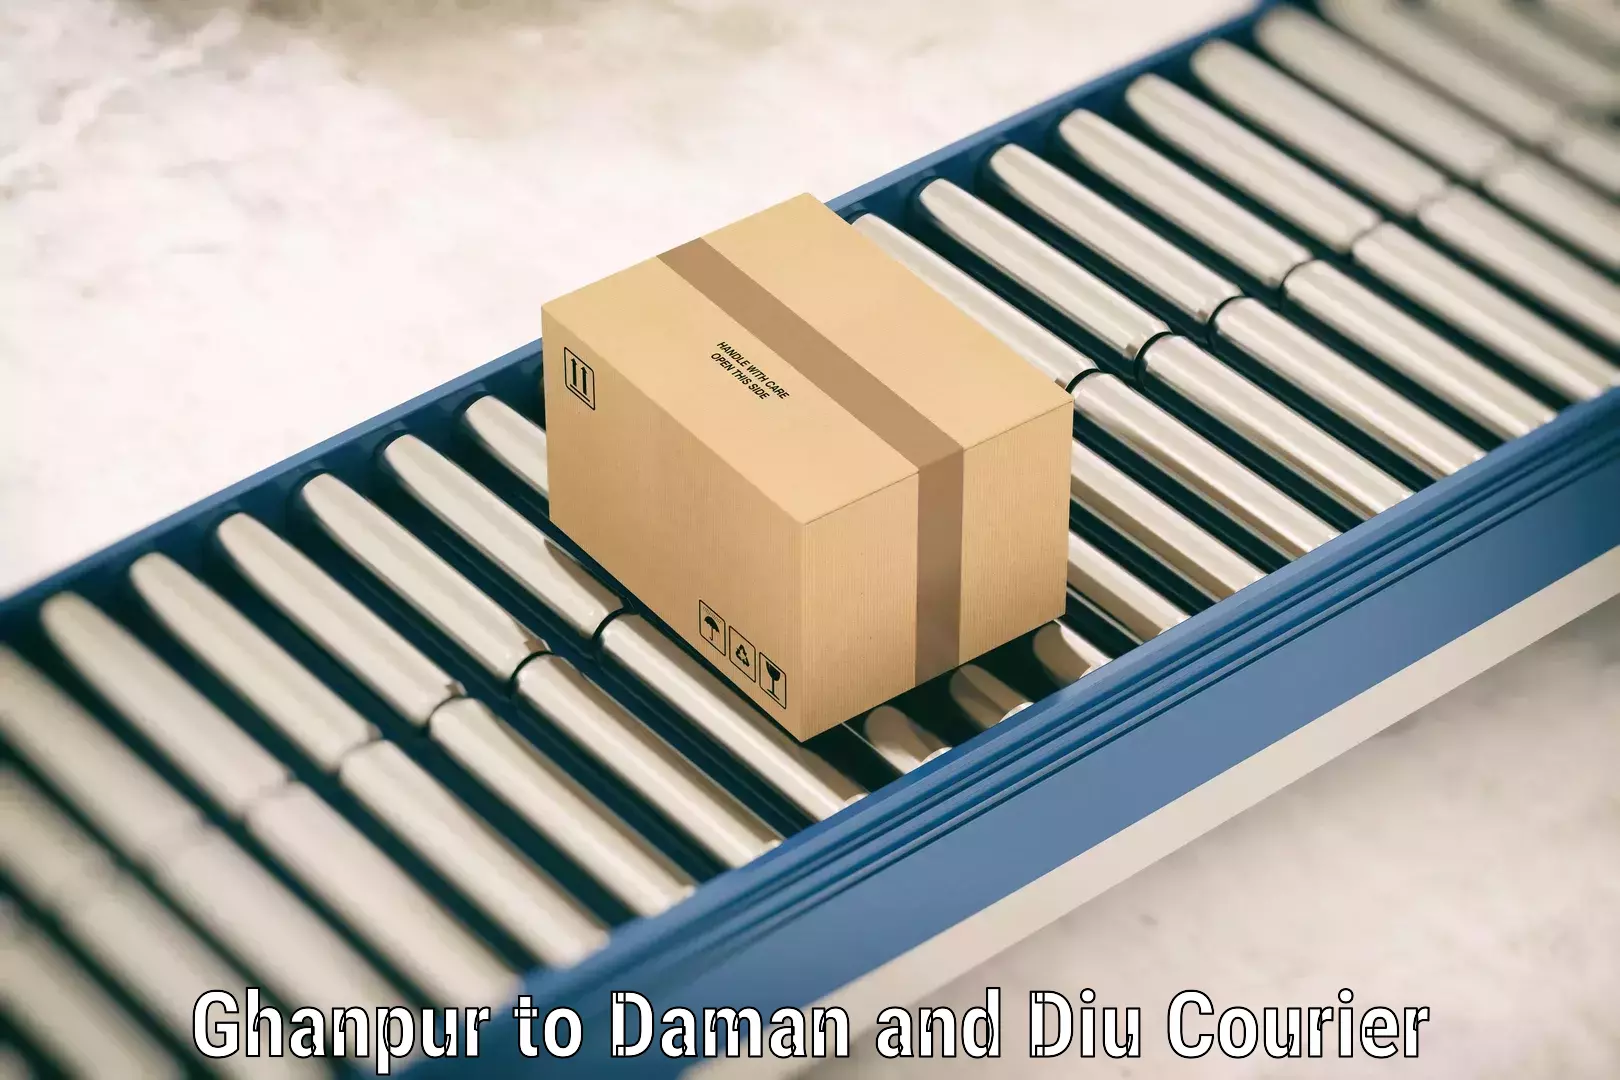 Baggage transport technology Ghanpur to Diu